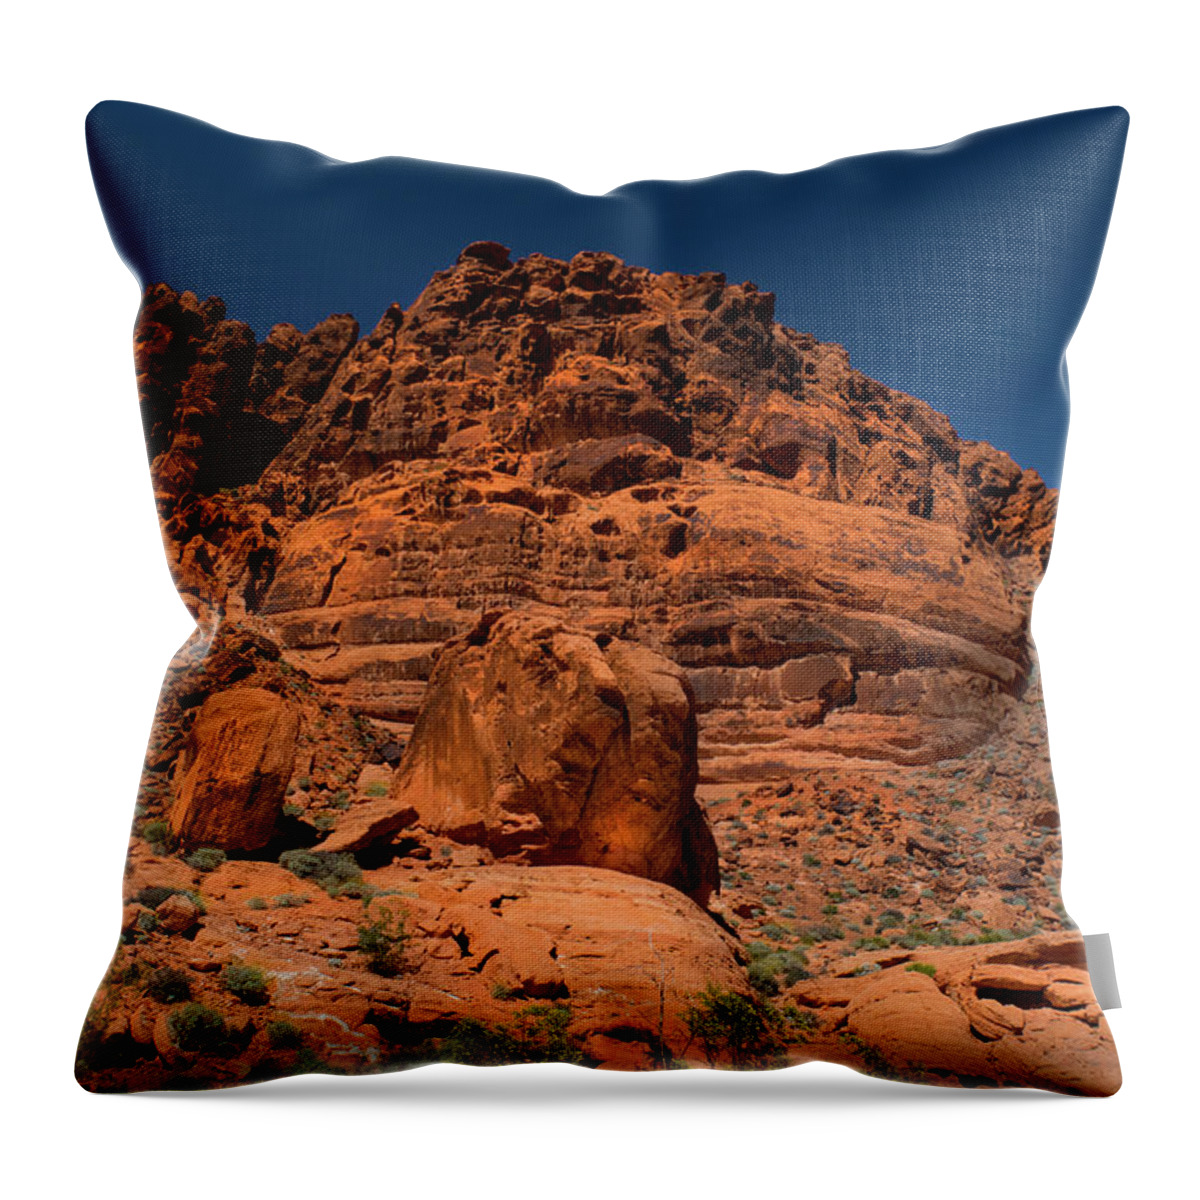 Landscape Throw Pillow featuring the photograph Martian Landscape Valley Of Fire by Frank Wilson